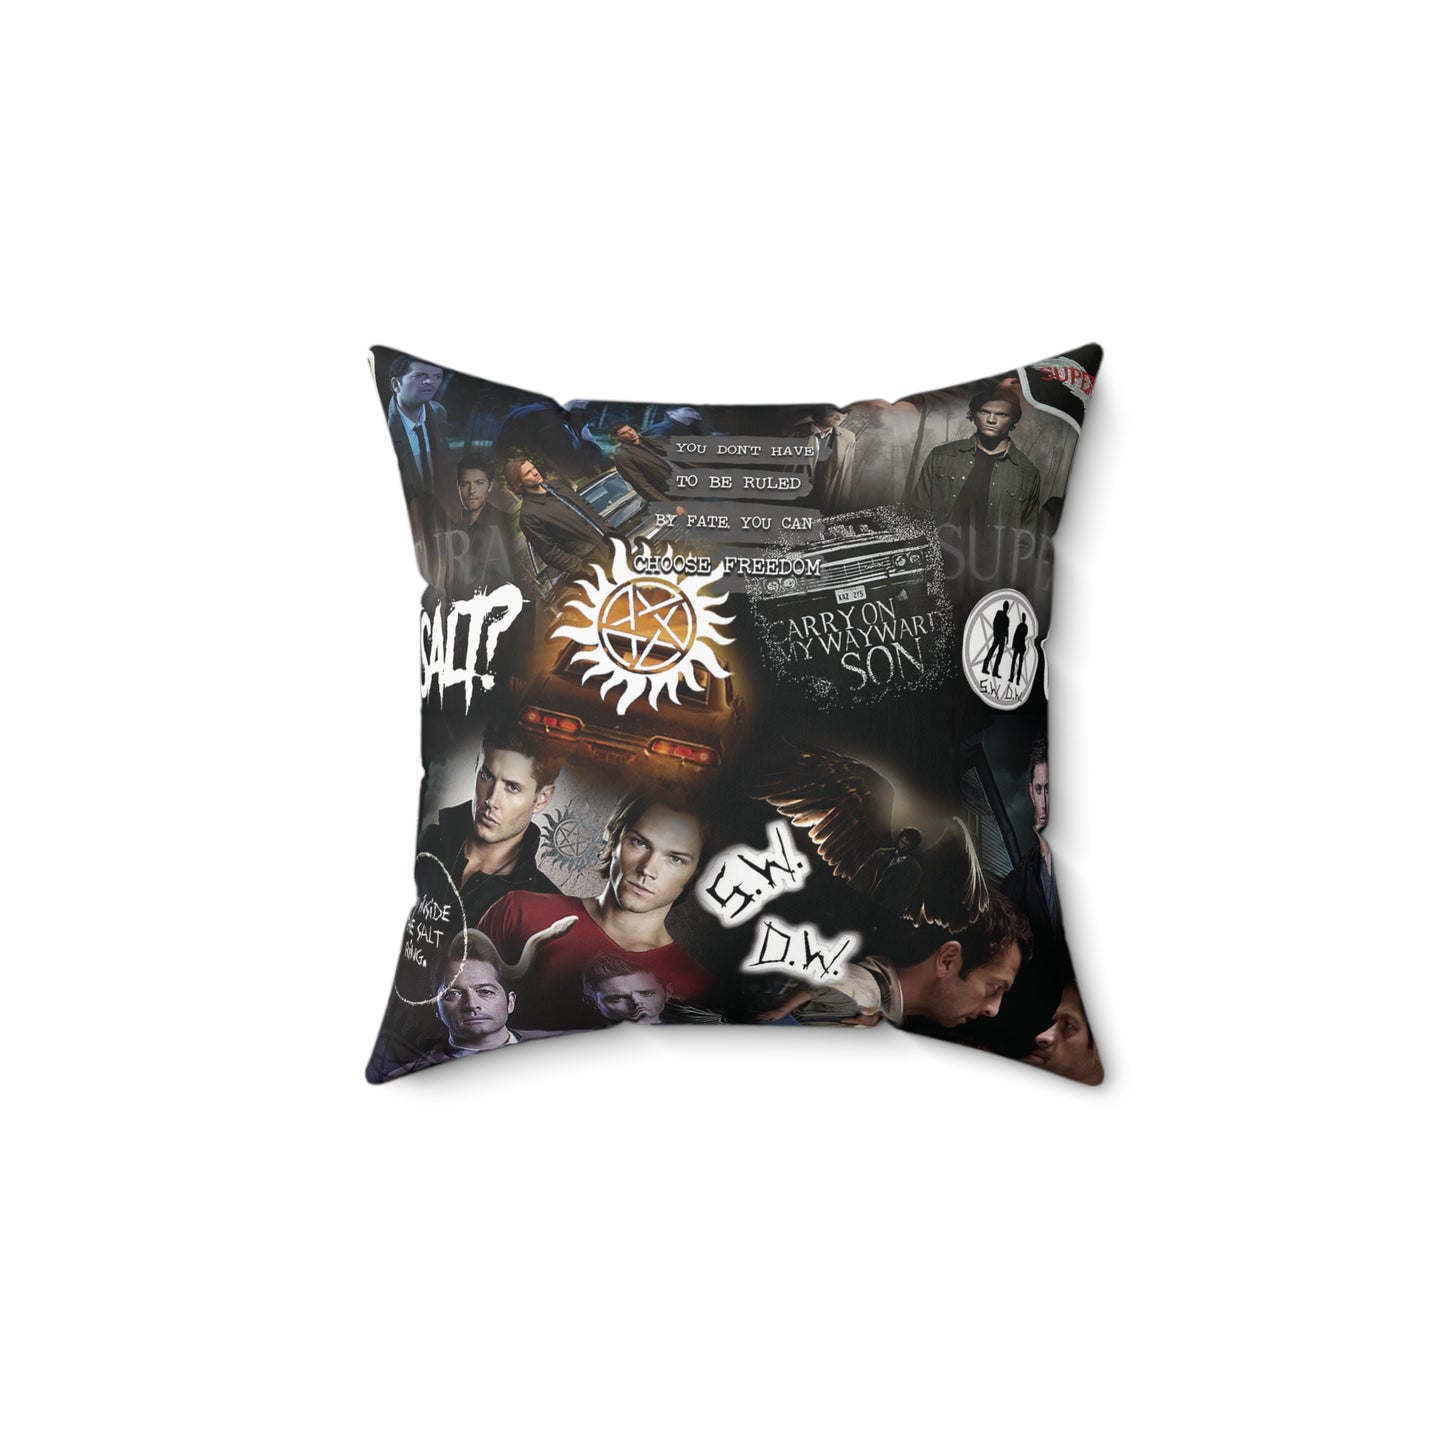 Brother impala love Square Pillow